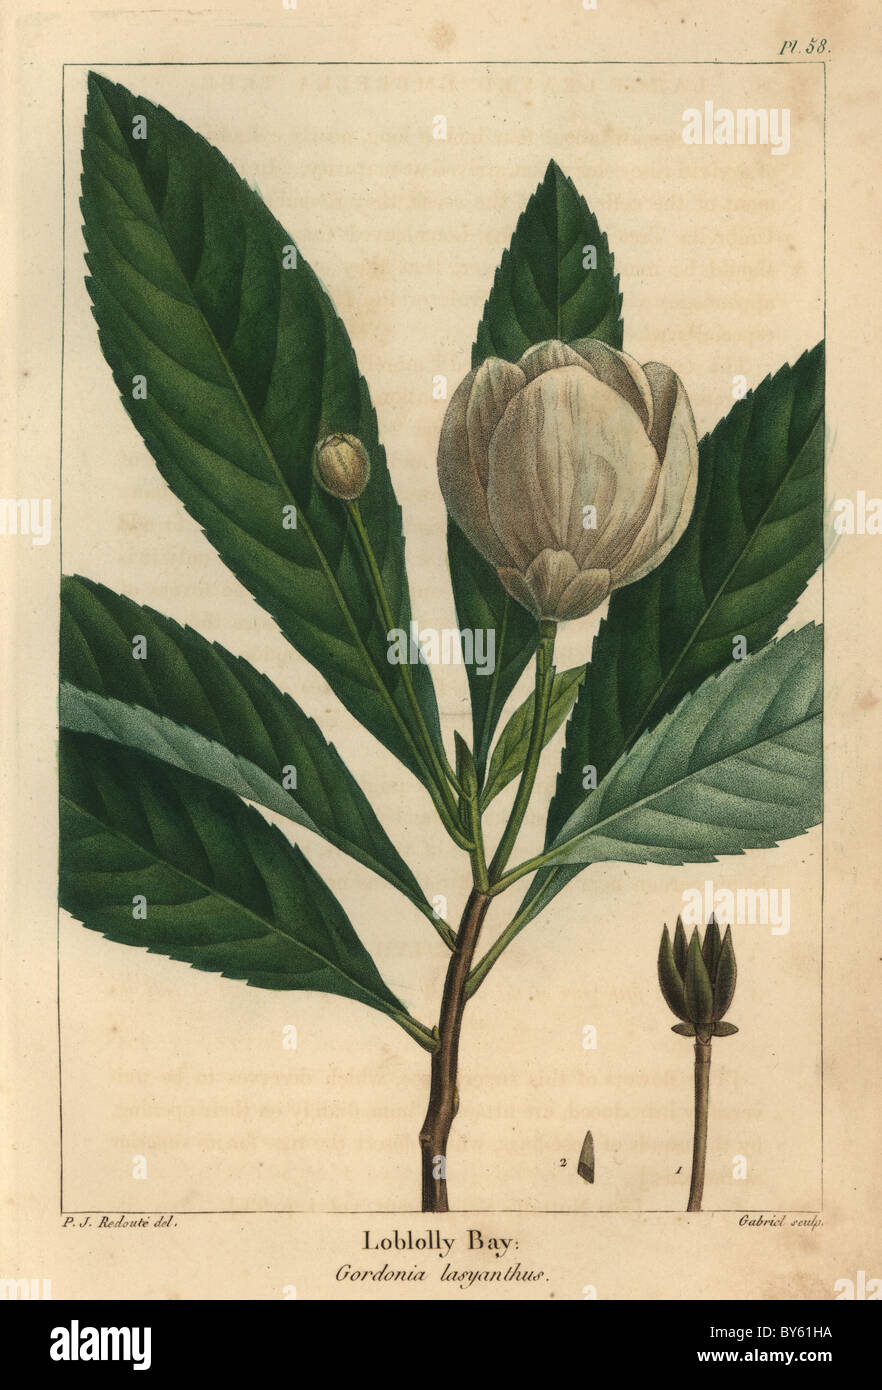 Flower, bud and leaves of the loblolly bay tree, Gordonia lasyanthus. Stock Photo